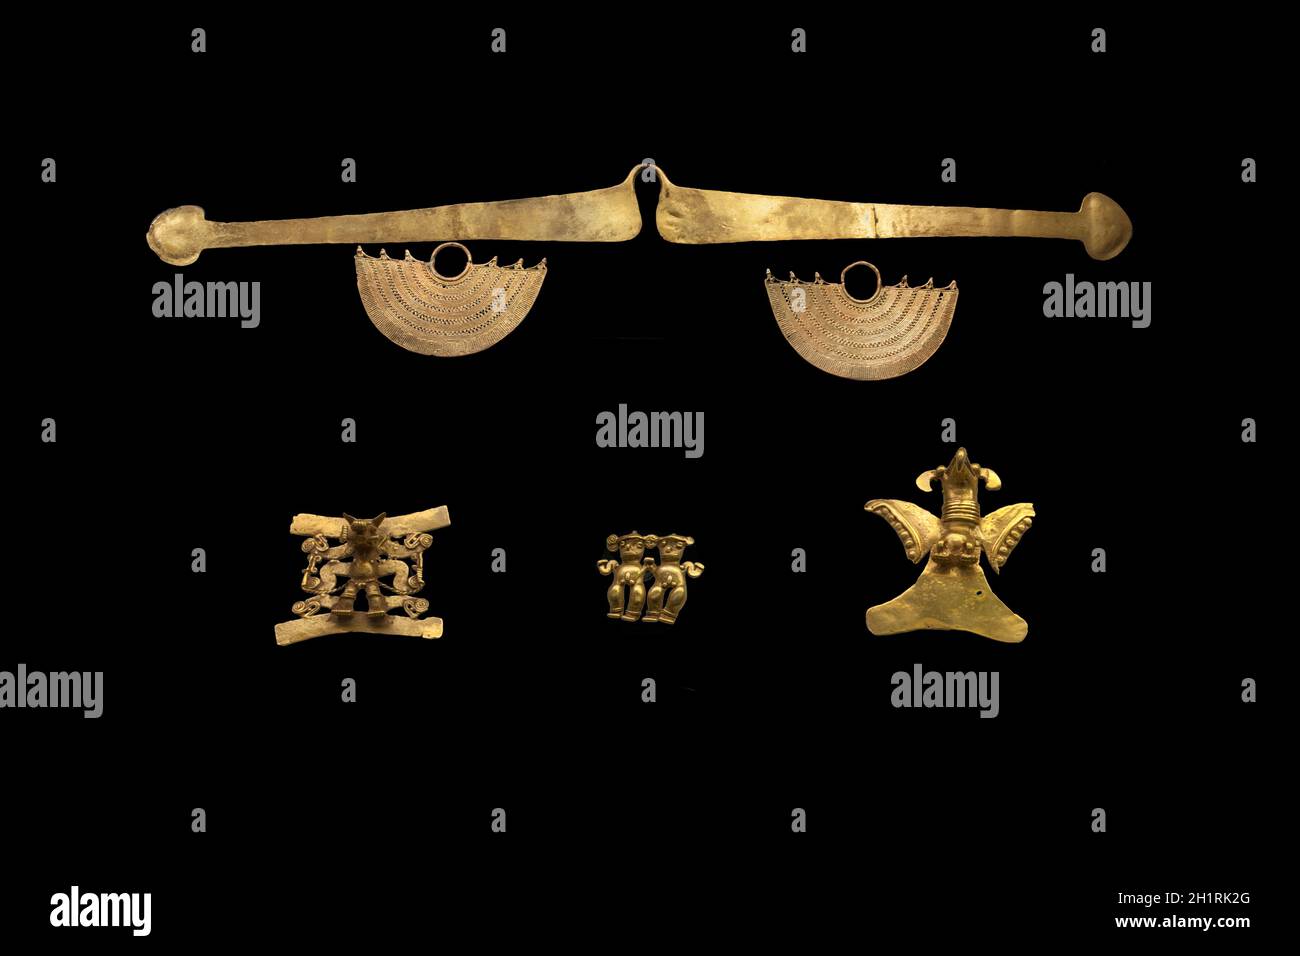 Madrid, Spain - Jul 11th, 2020: Set of gold pendants from the Diquis Culture of Costa Rica. Period IV. 1000 BC. Museum of the Americas, Madrid, Spain Stock Photo